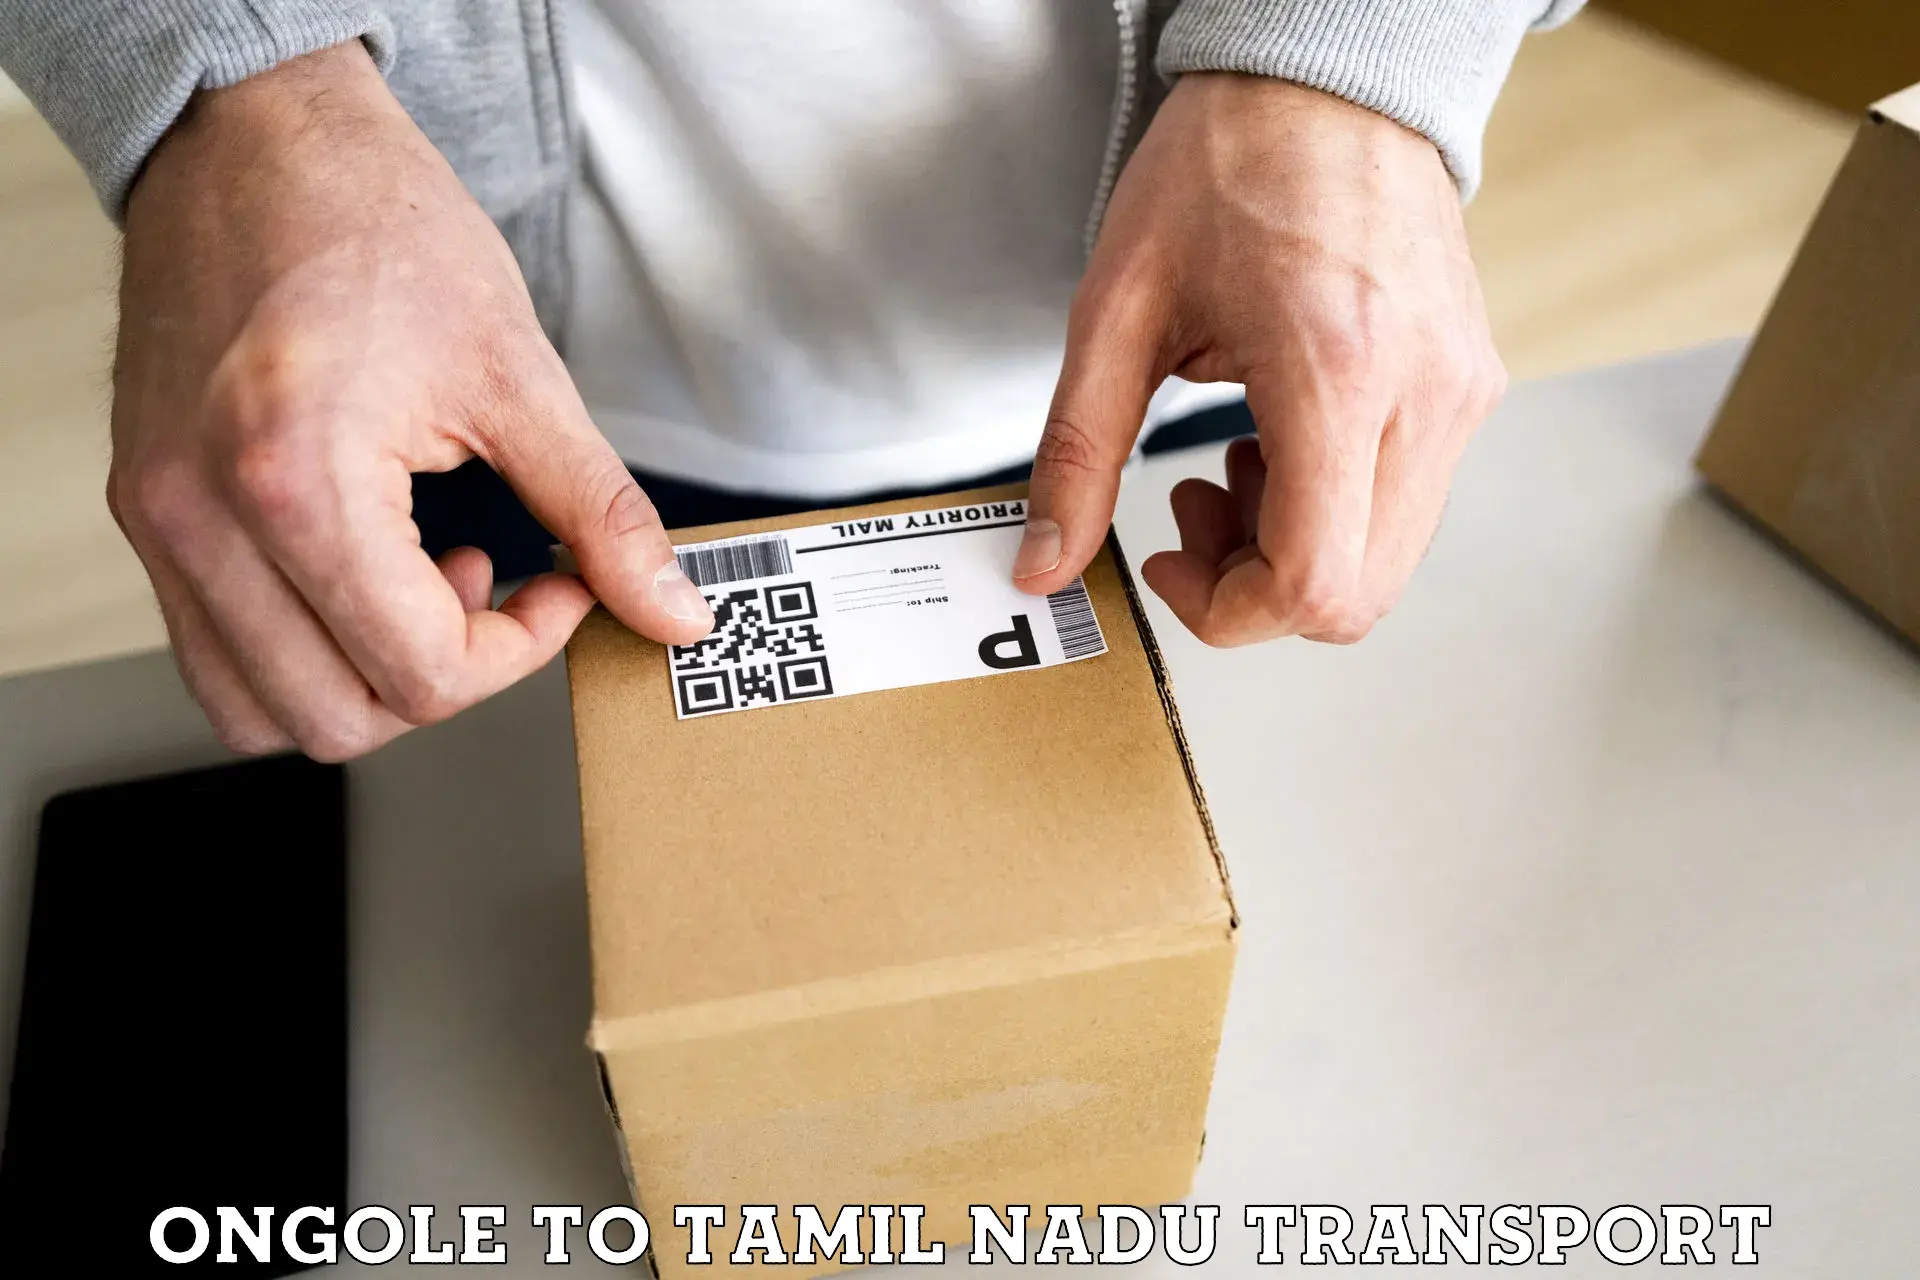 Shipping services Ongole to Cuddalore